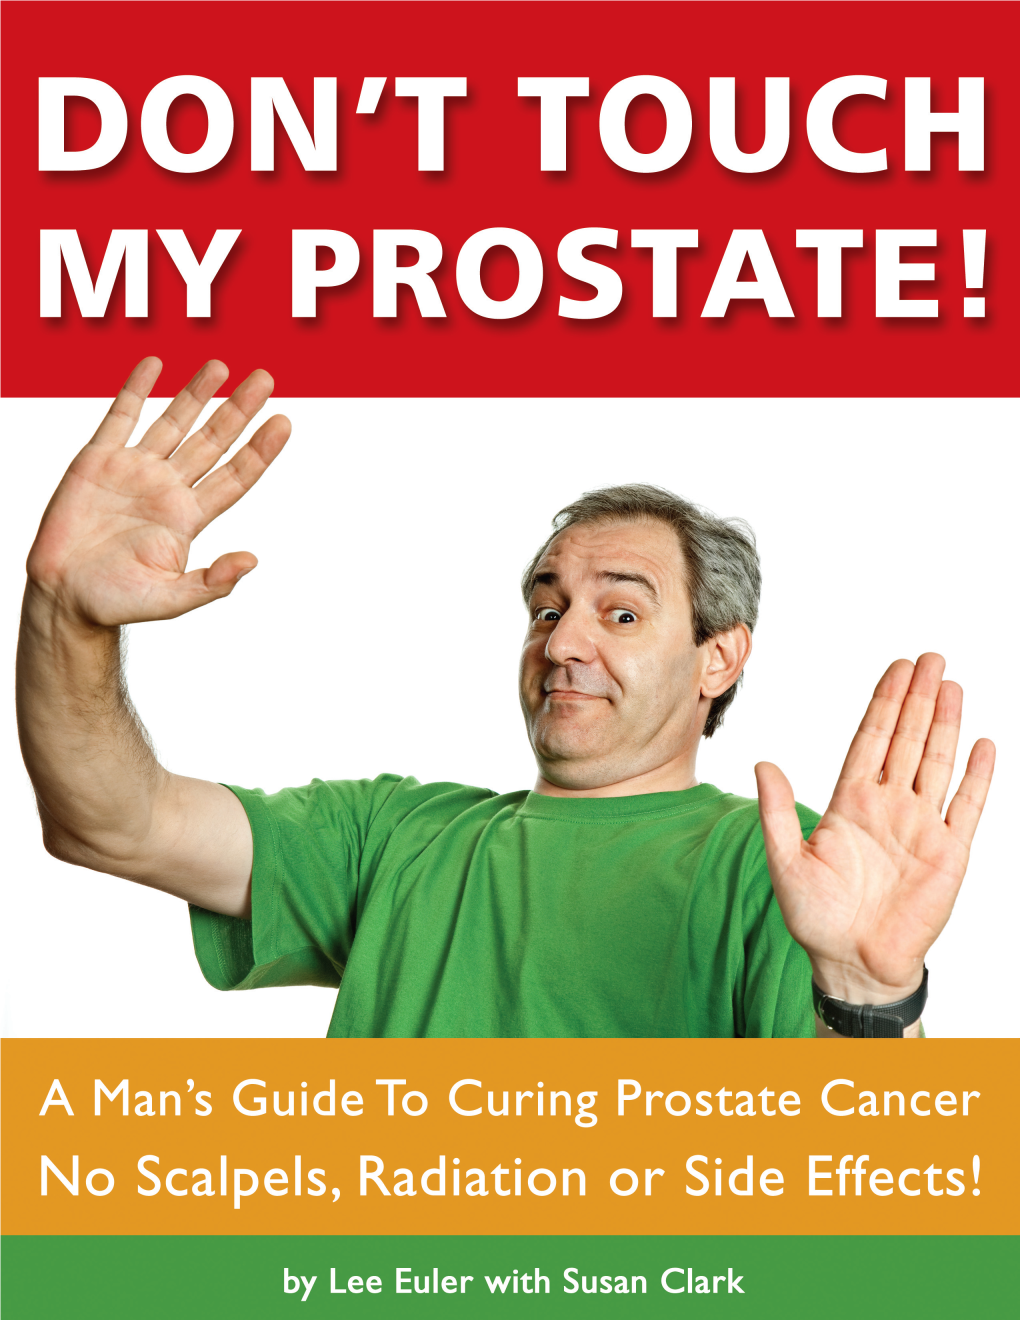 Macrobiotics As a Prostate Cancer Psuhyhqwdwlyhq